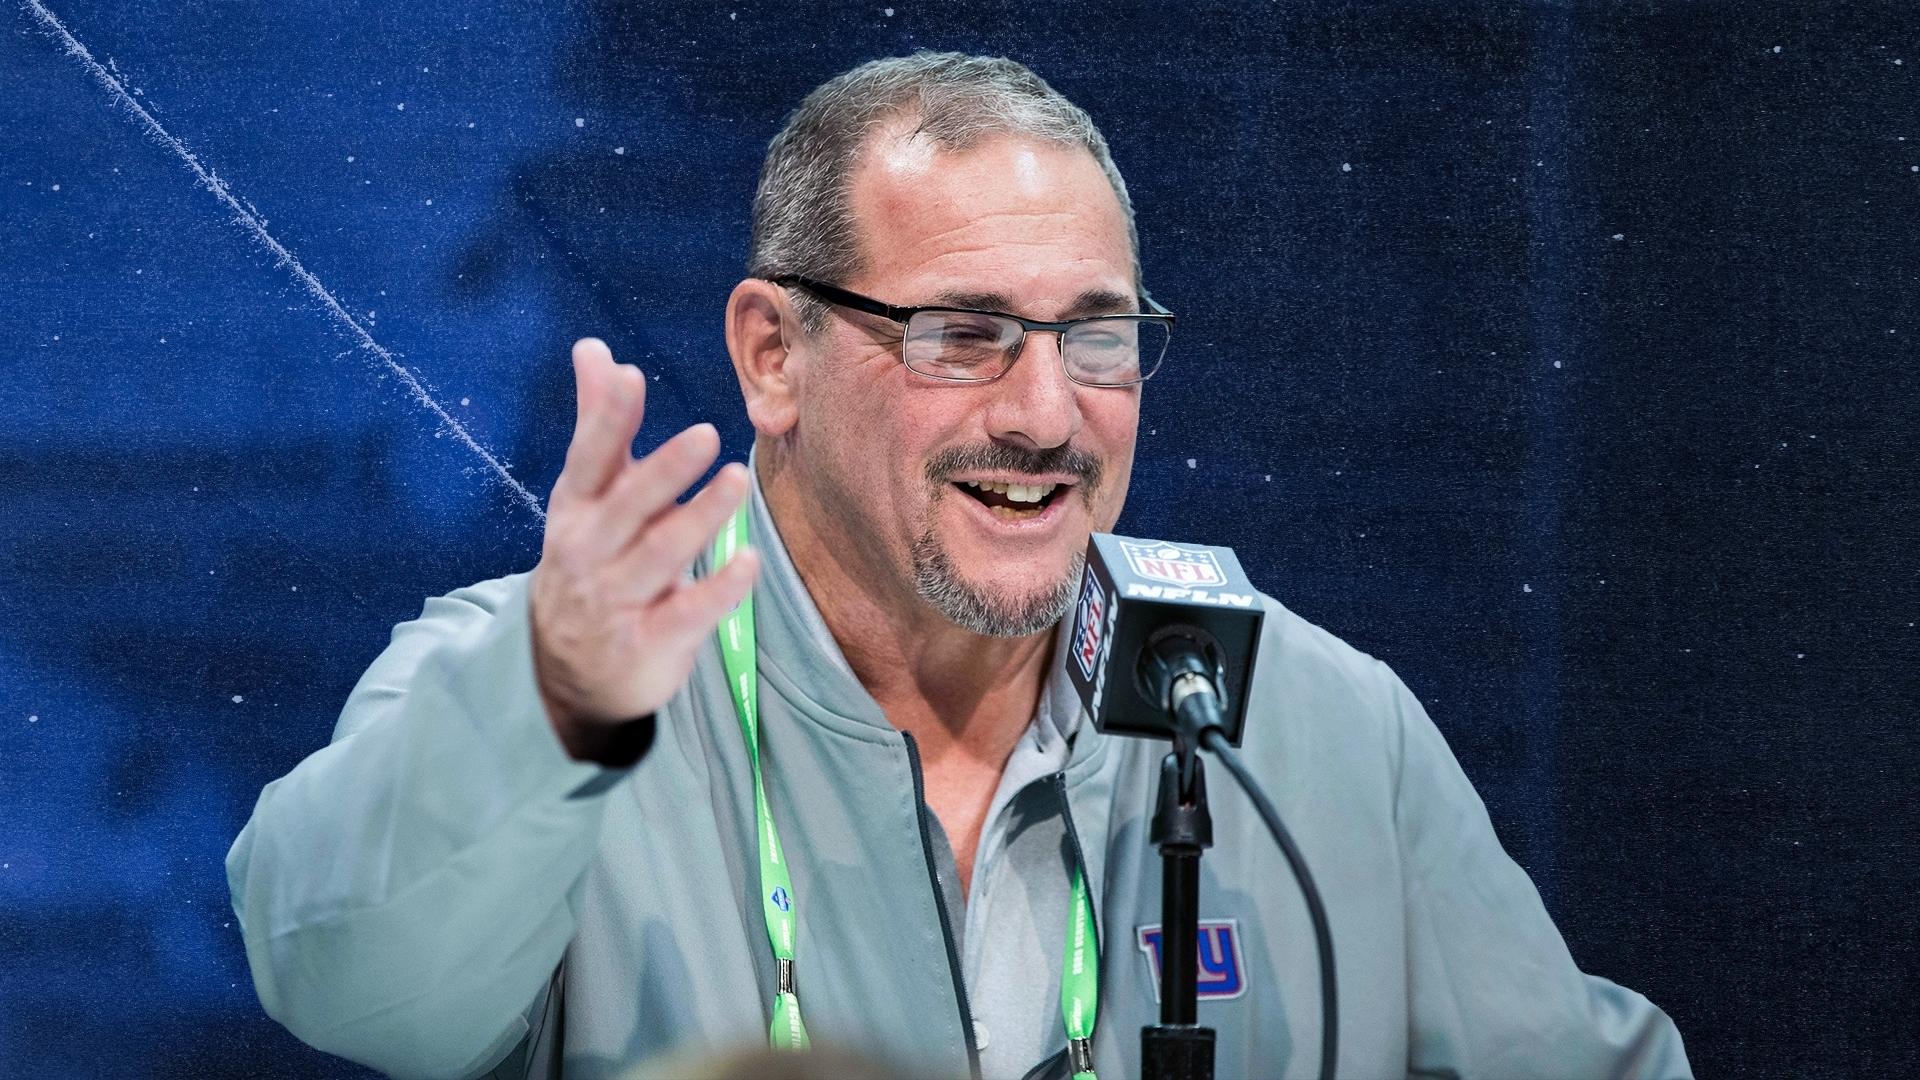 Giants GM Dave Gettleman / Treated Image by SNY